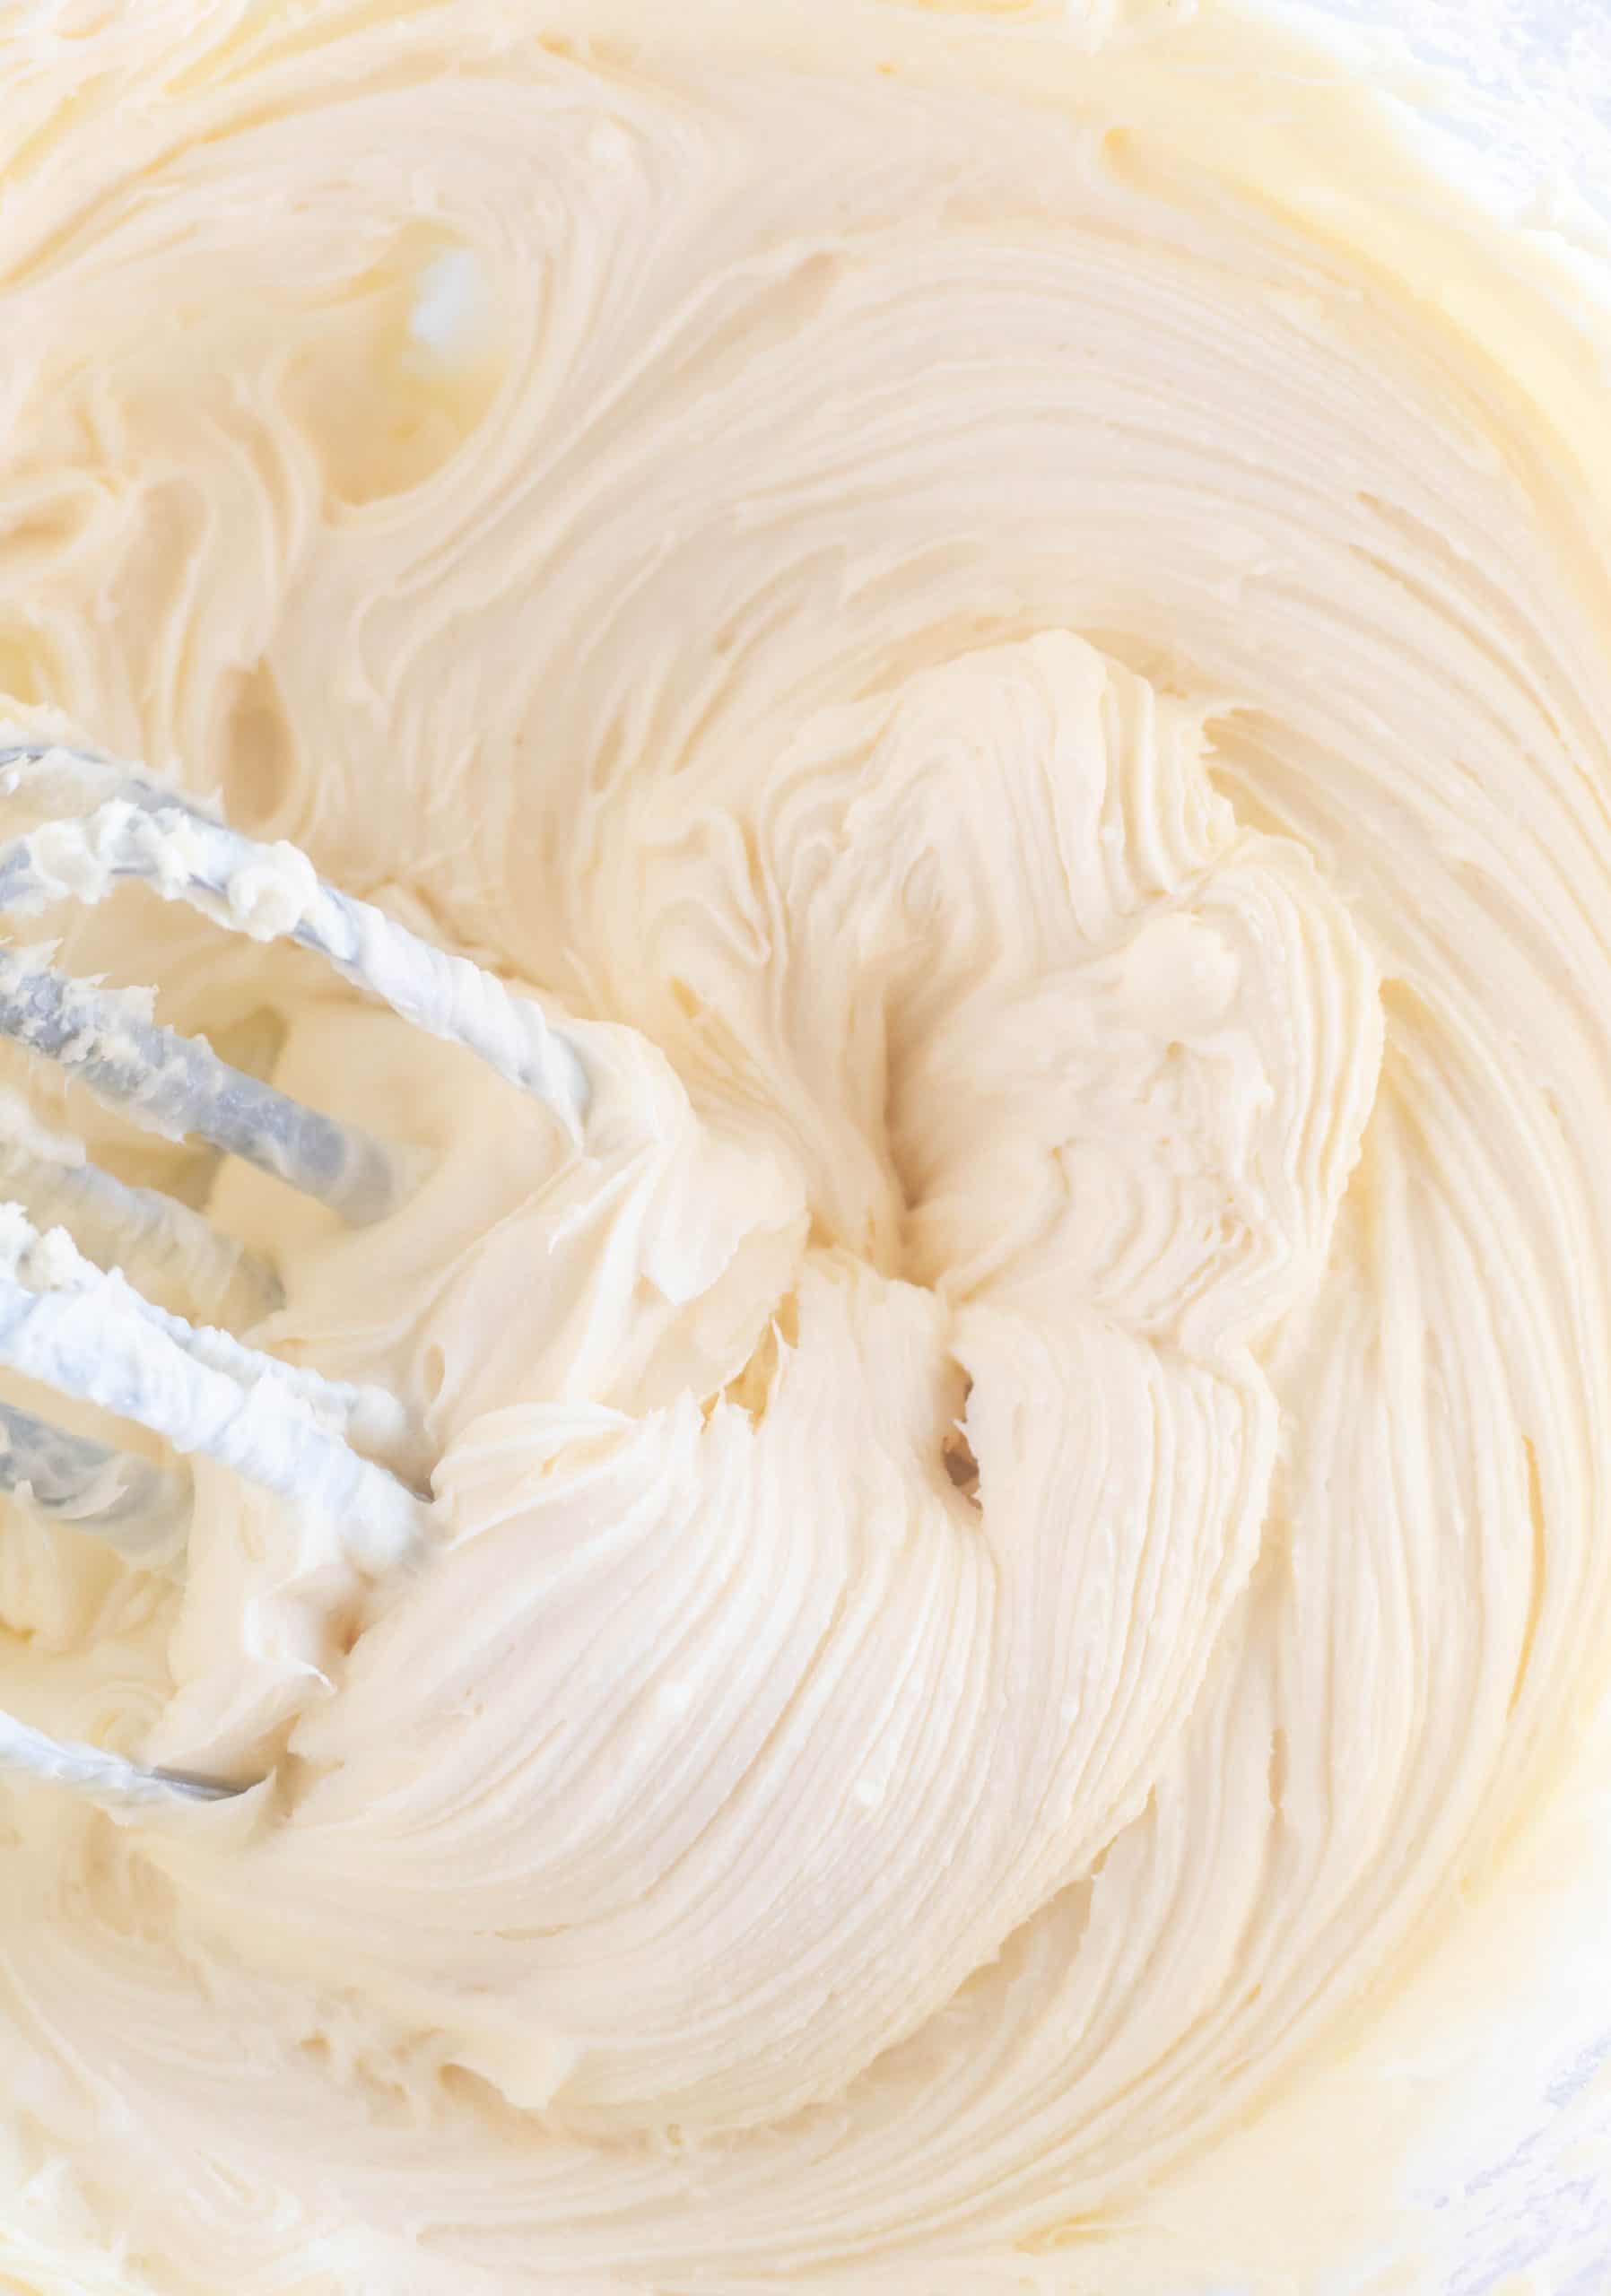 cream cheese frosting in a large bowl with beaters